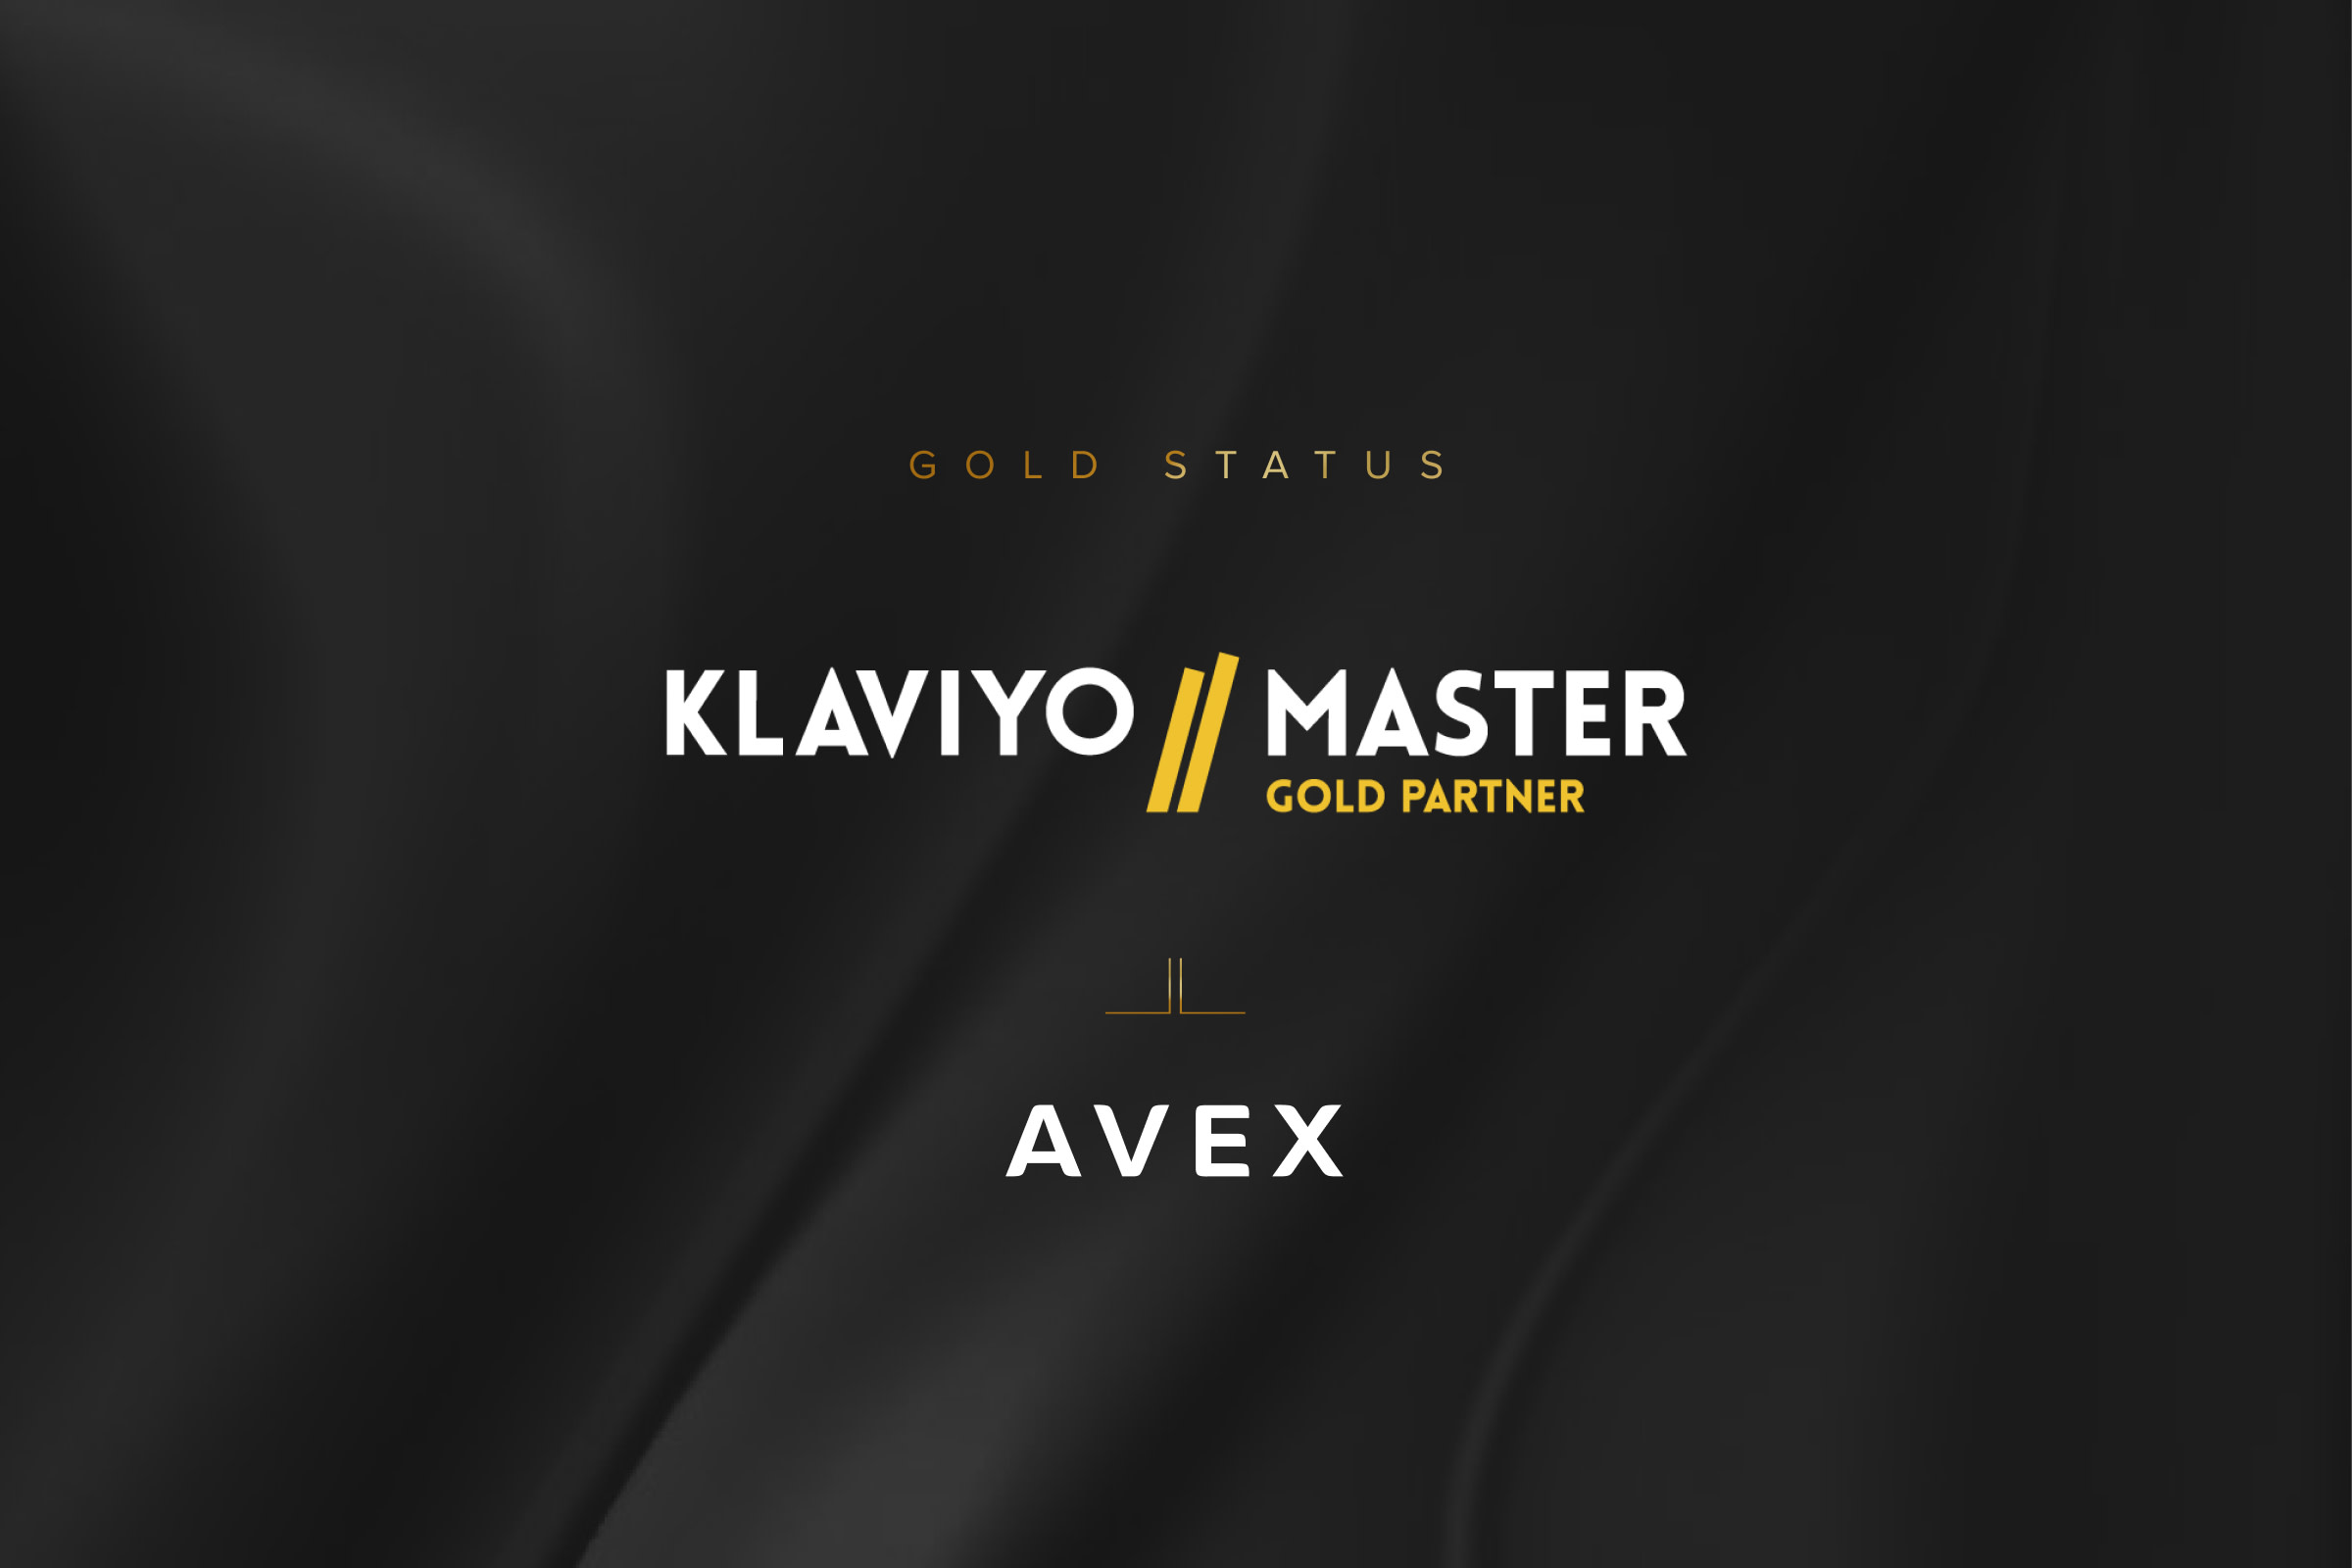 Avex is now a Klaviyo Master Gold Partner, specializing in email marketing for DTC e-commerce brands.